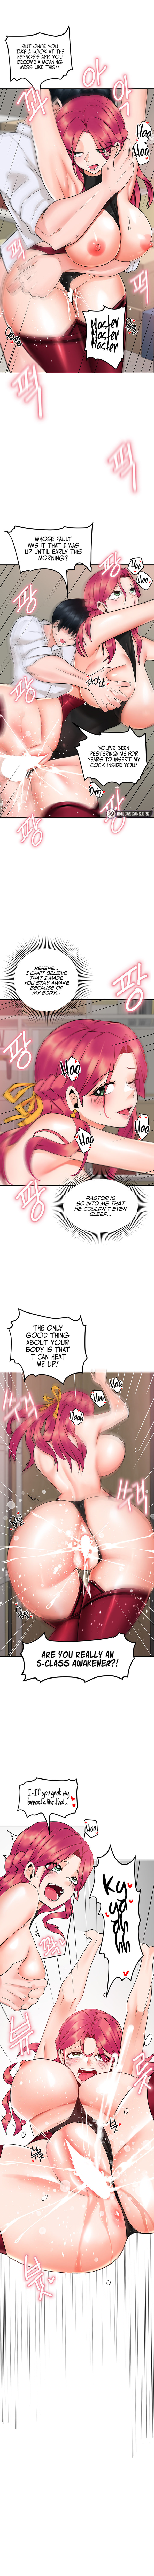 The Hypnosis App was Fake - Chapter 8 Page 7